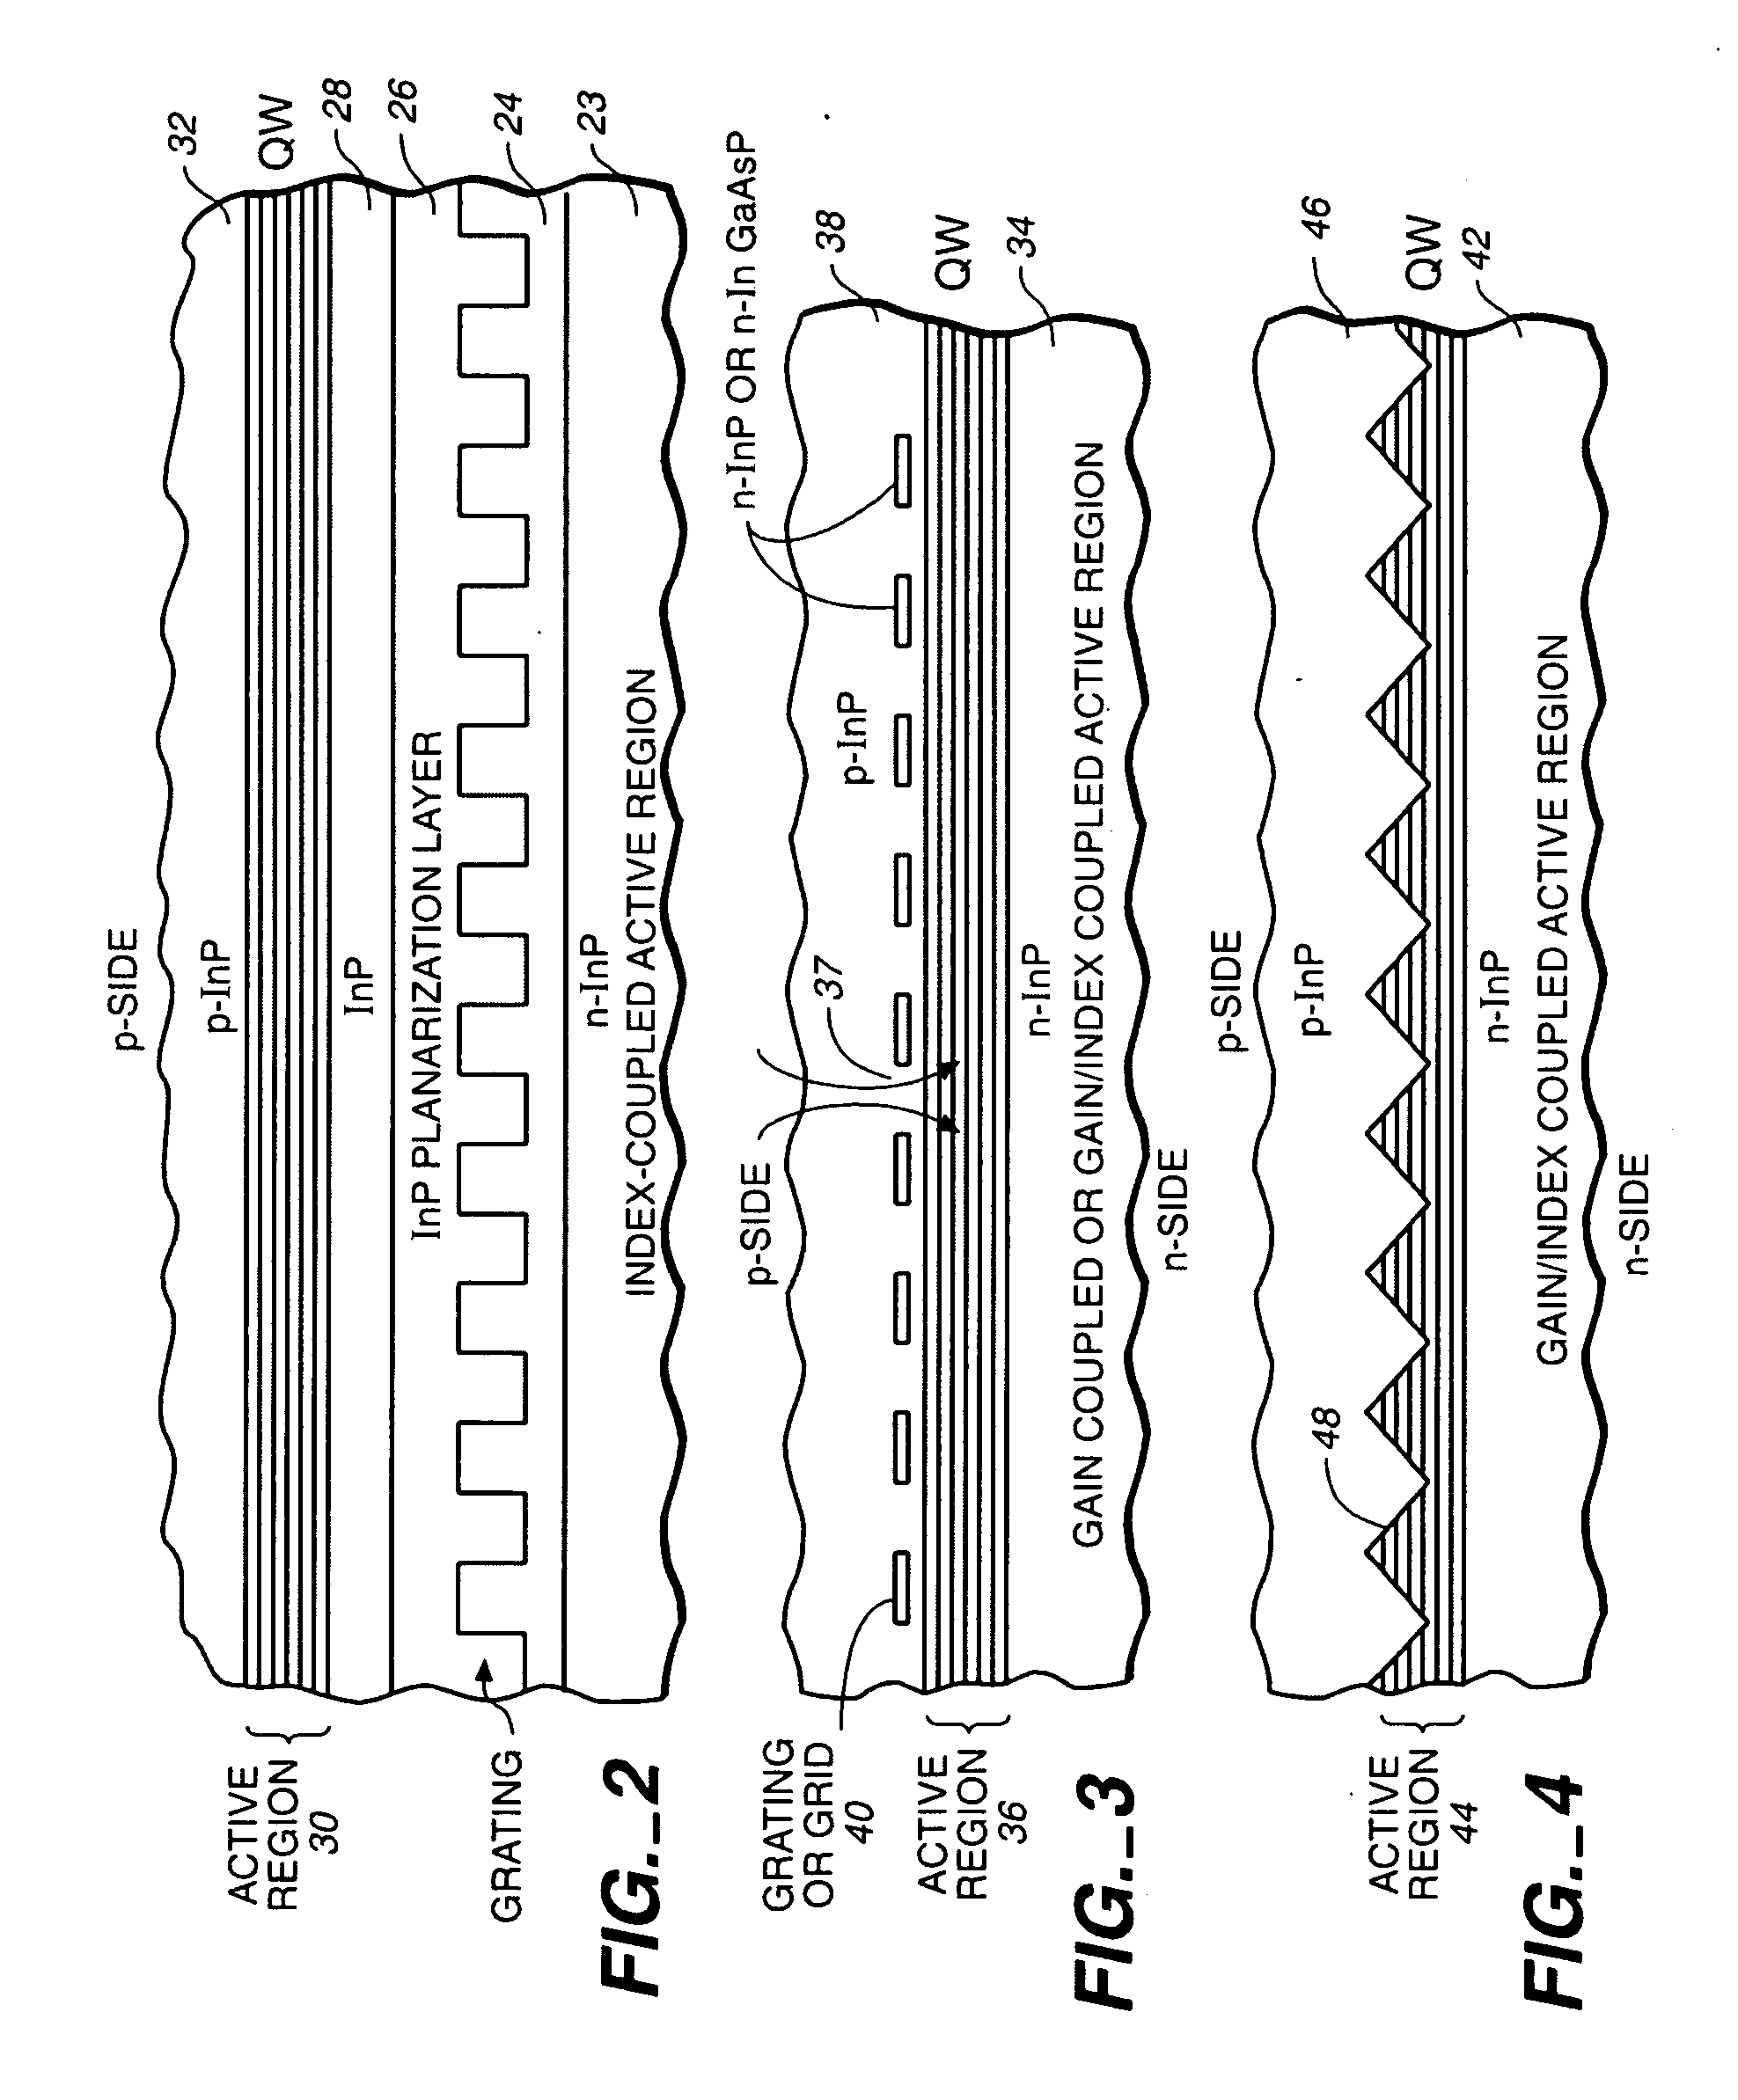 Method of manufacturing and apparatus for a transmitter photonic integrated circuit (TXPIC) chip